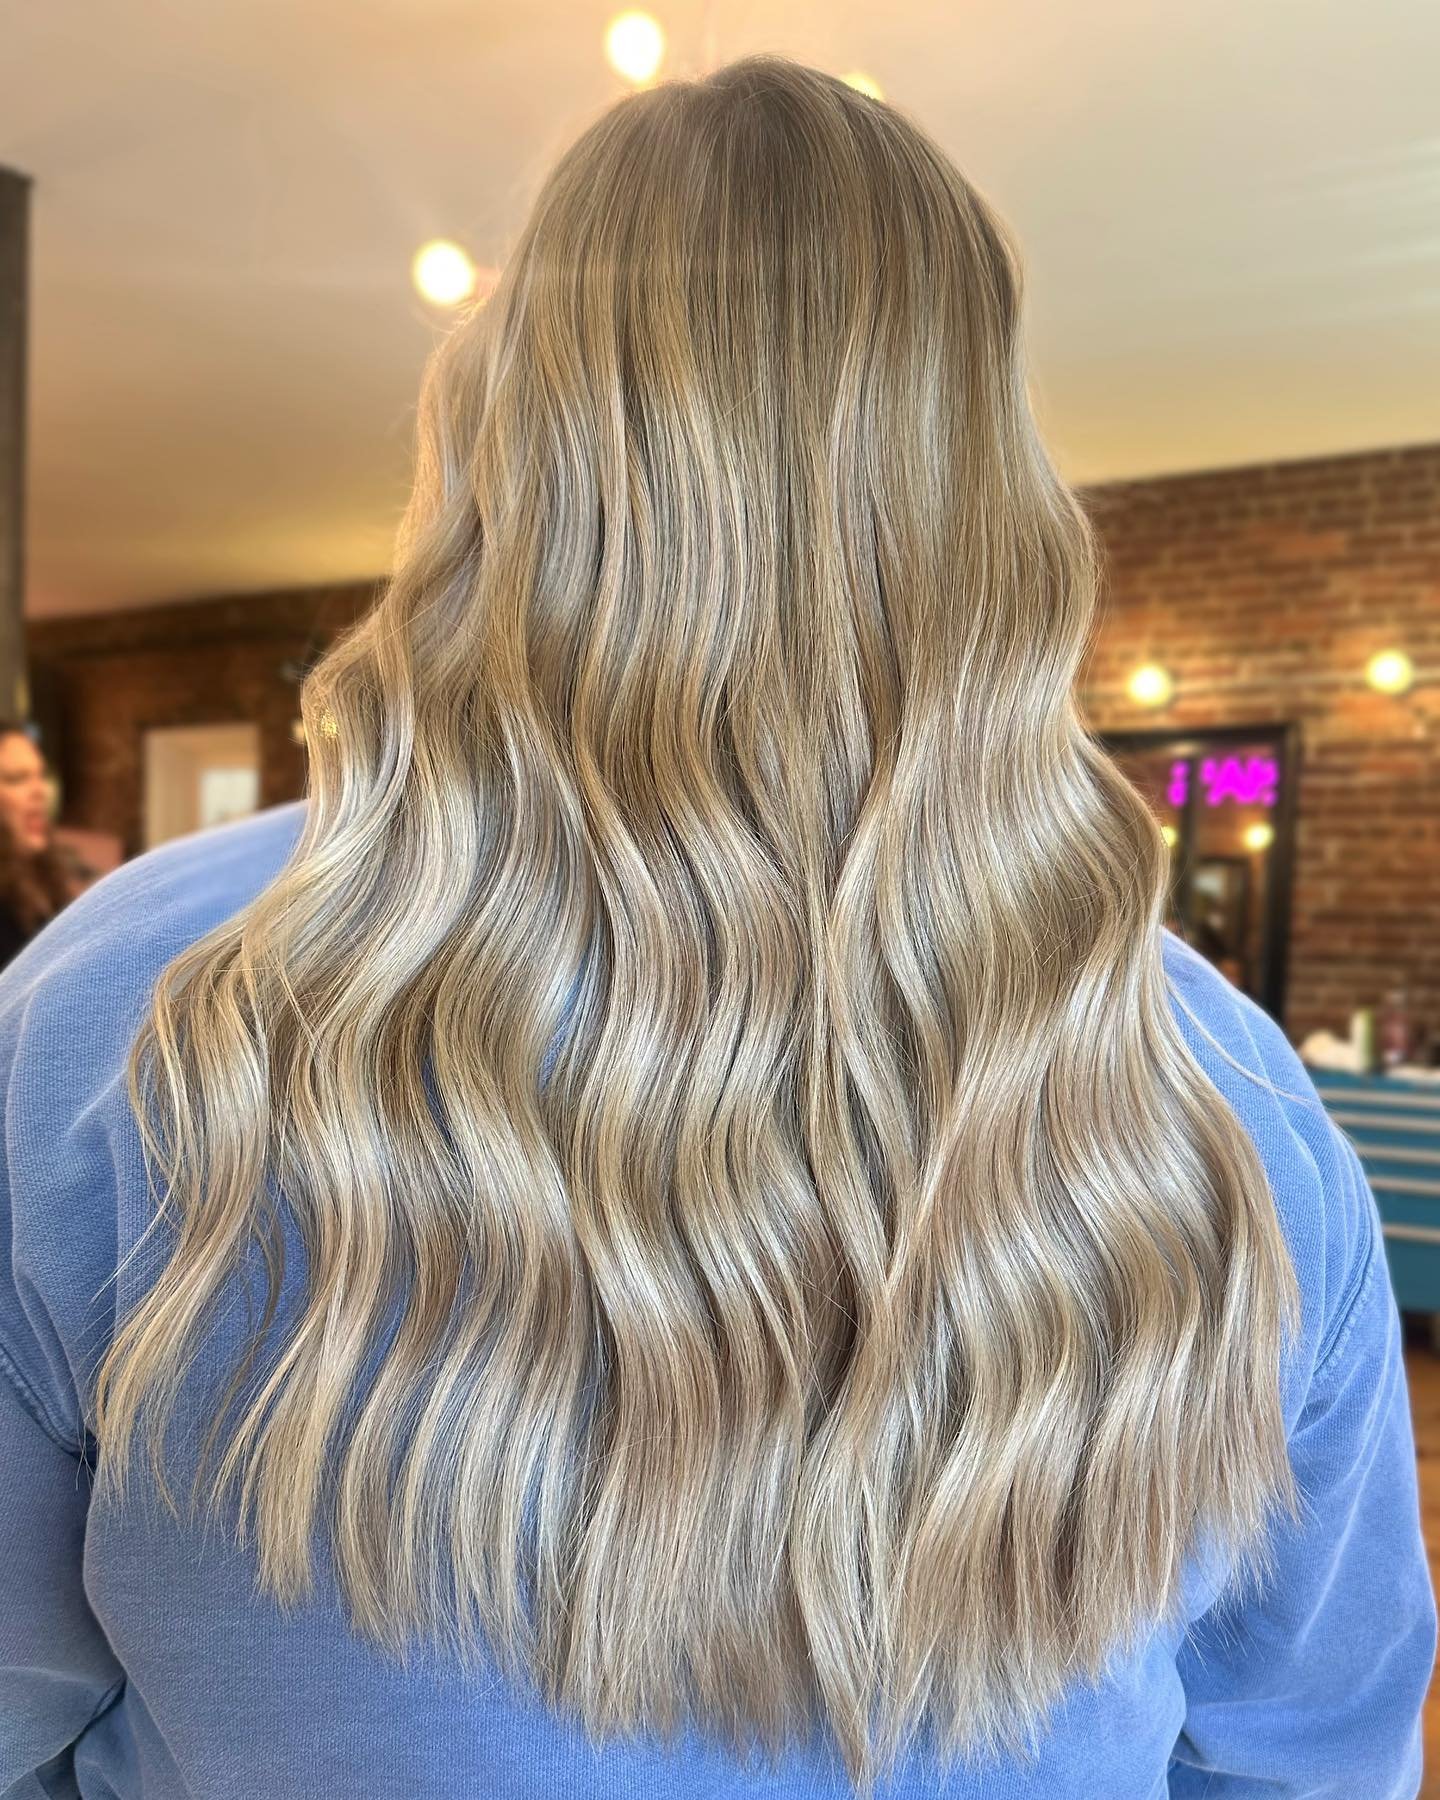 Bright blondes will never go out of style. ✨

#chachasalon #lex #lexky #lexingtonky #lexingtonhairstylist #lexingtonhair #kyhair #kyhairstylist #kentuckyhair #kentuckyhairstylist #universityofkentucky